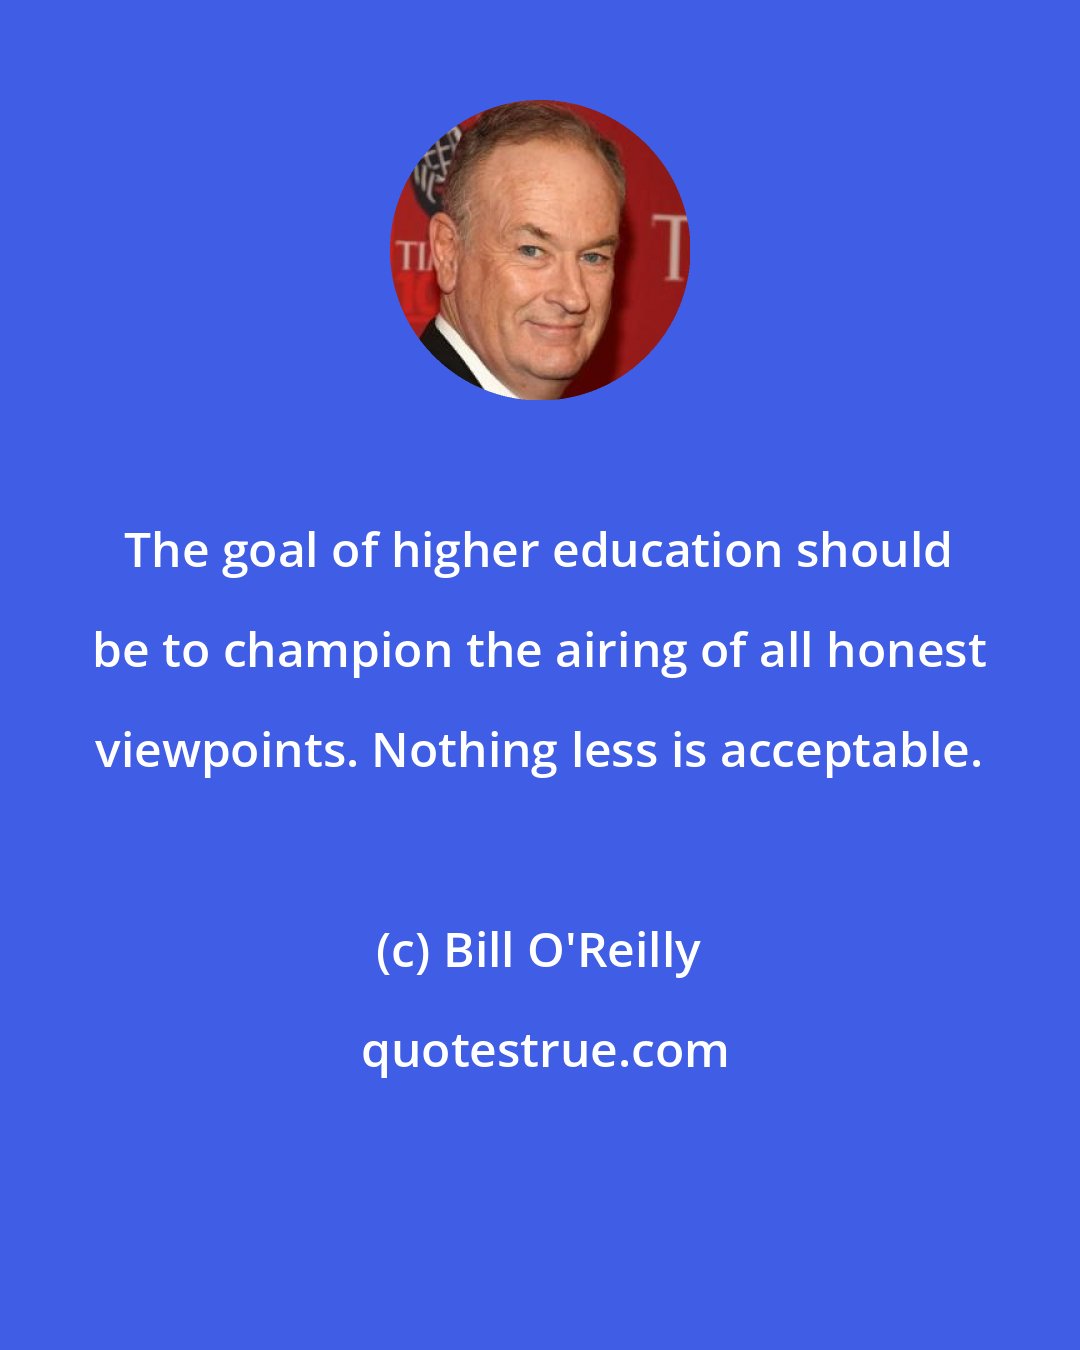 Bill O'Reilly: The goal of higher education should be to champion the airing of all honest viewpoints. Nothing less is acceptable.